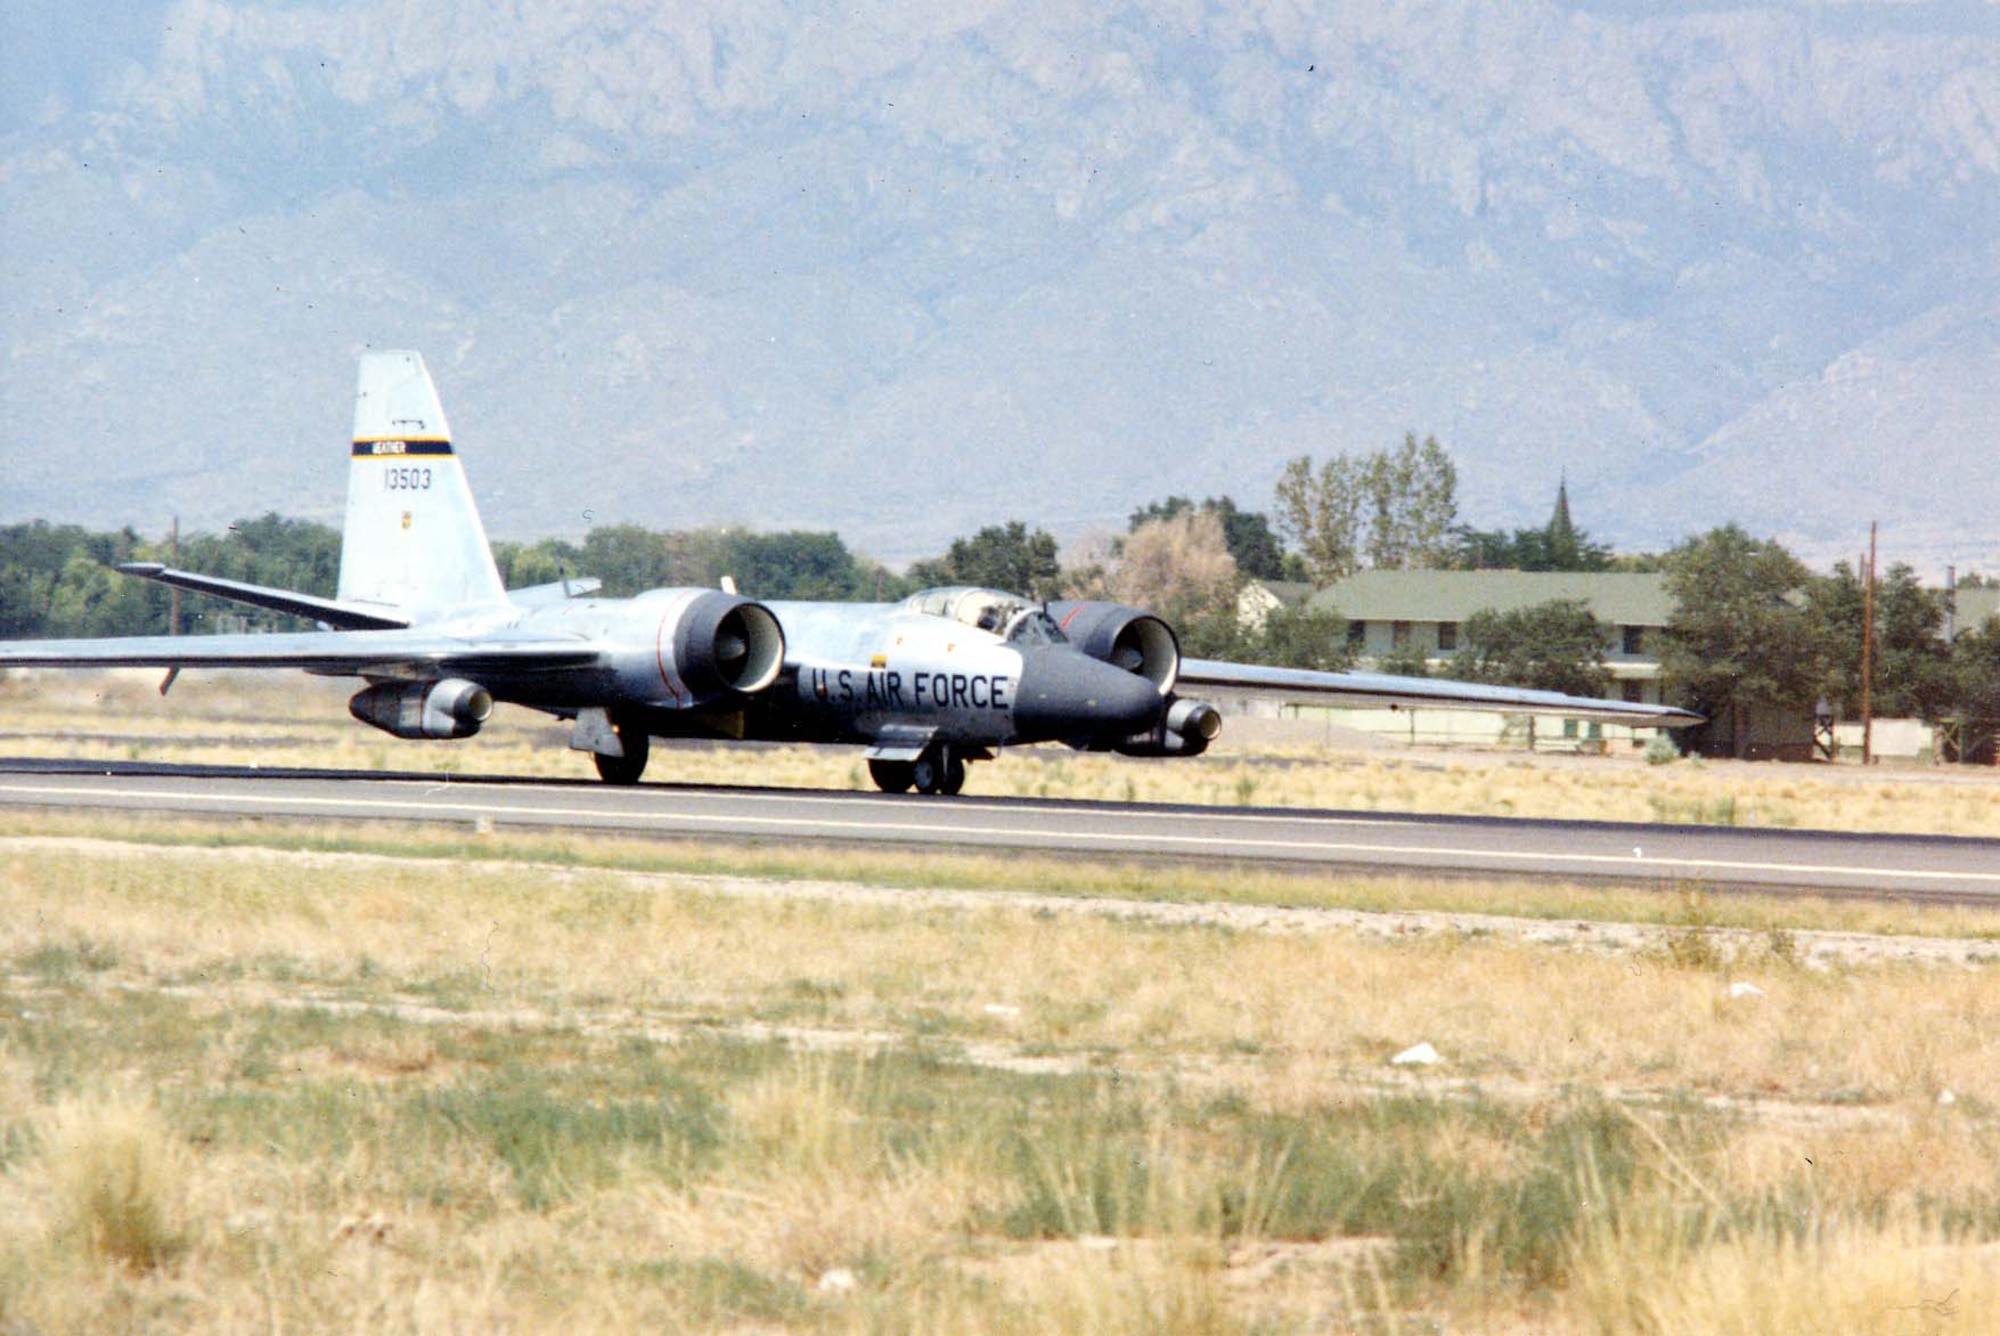 General Dynamics WB-57F Canberra taxiing (S/N 63-13286). Originally, aircraft was B-57B, S/N 52-1589. This was the first RB-57F converted. (U.S. Air Force photo)